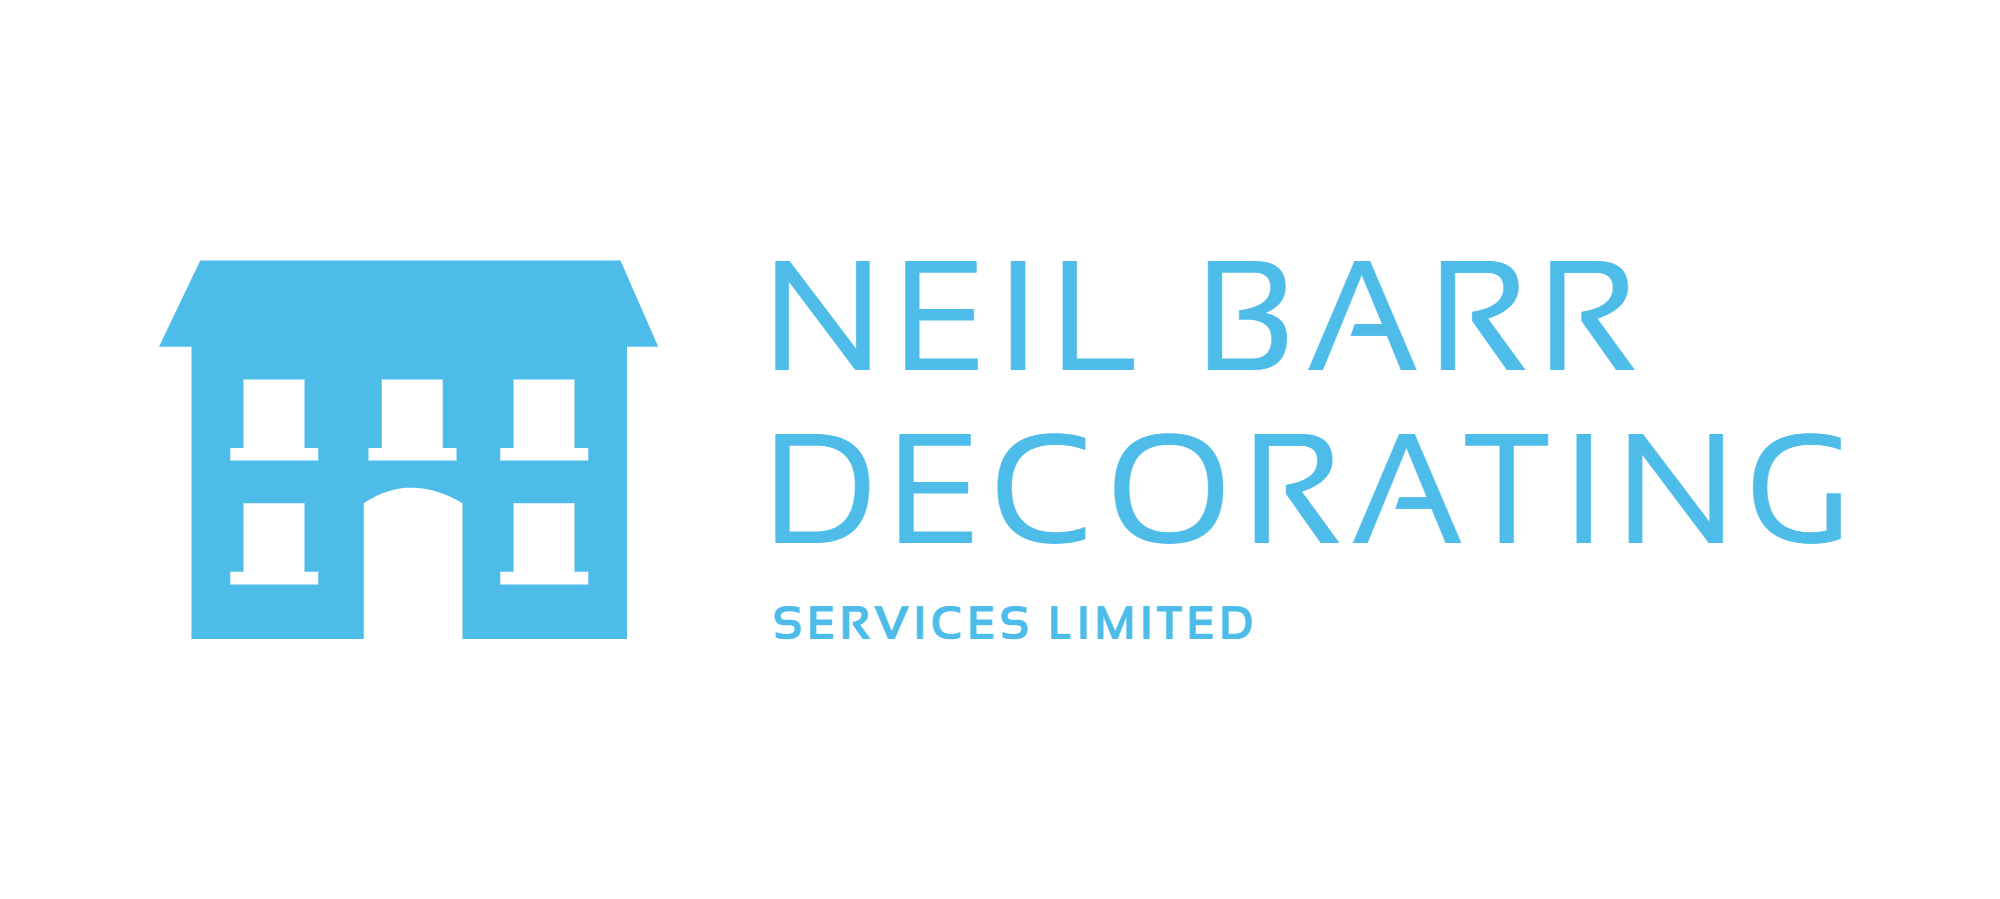 Neil Barr Decorating Services Limited